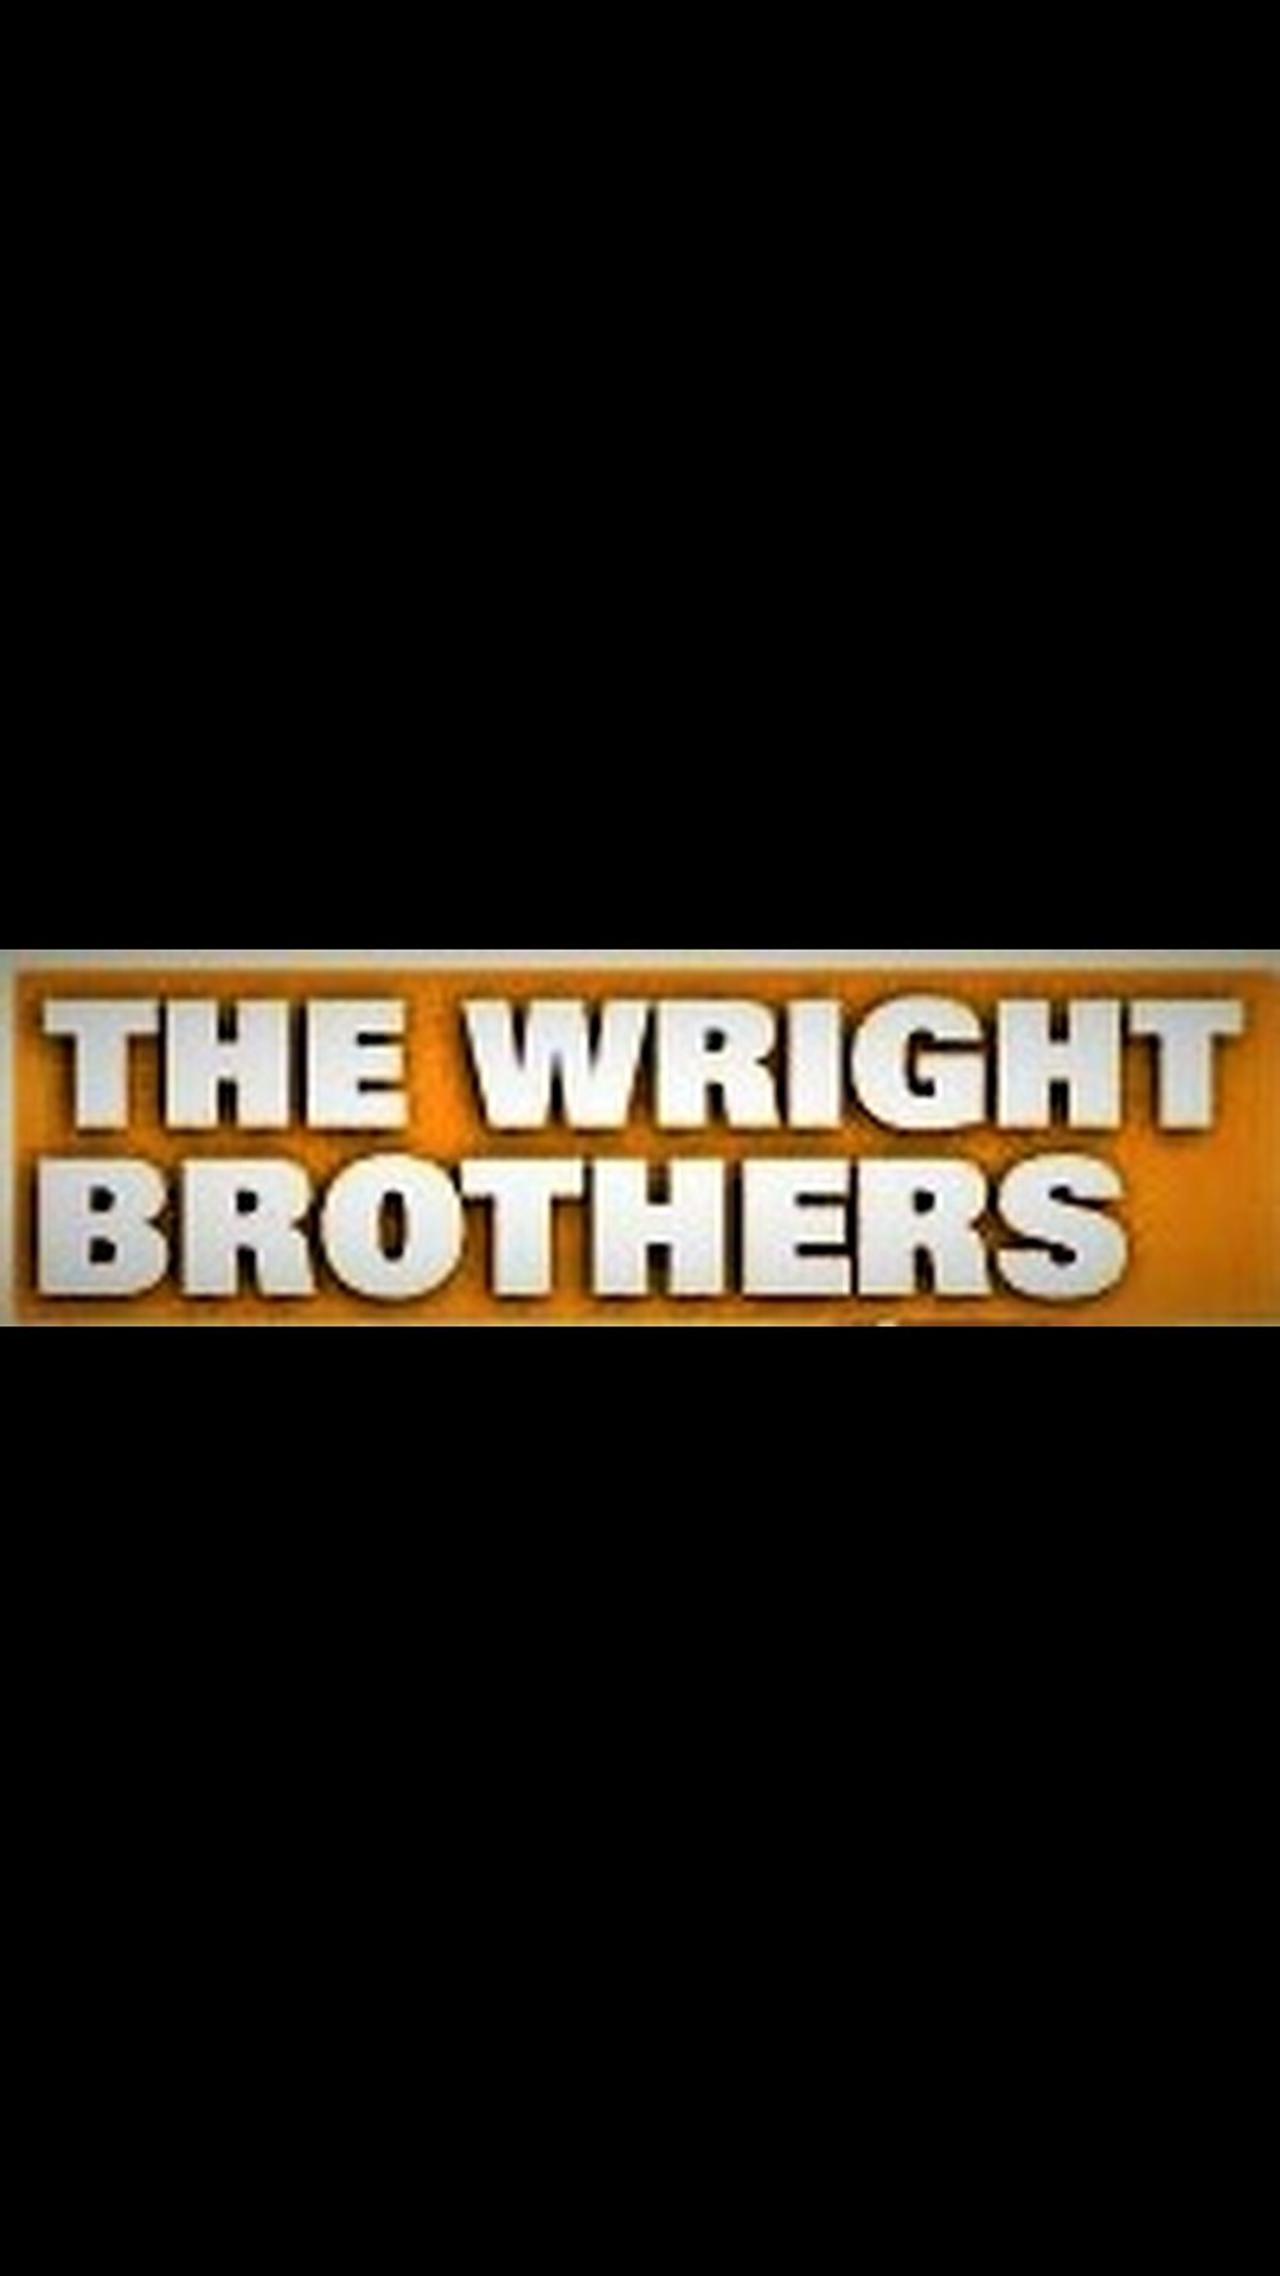 The Wright Brothers Fraud: Did Not Fly (1800s deep fake)